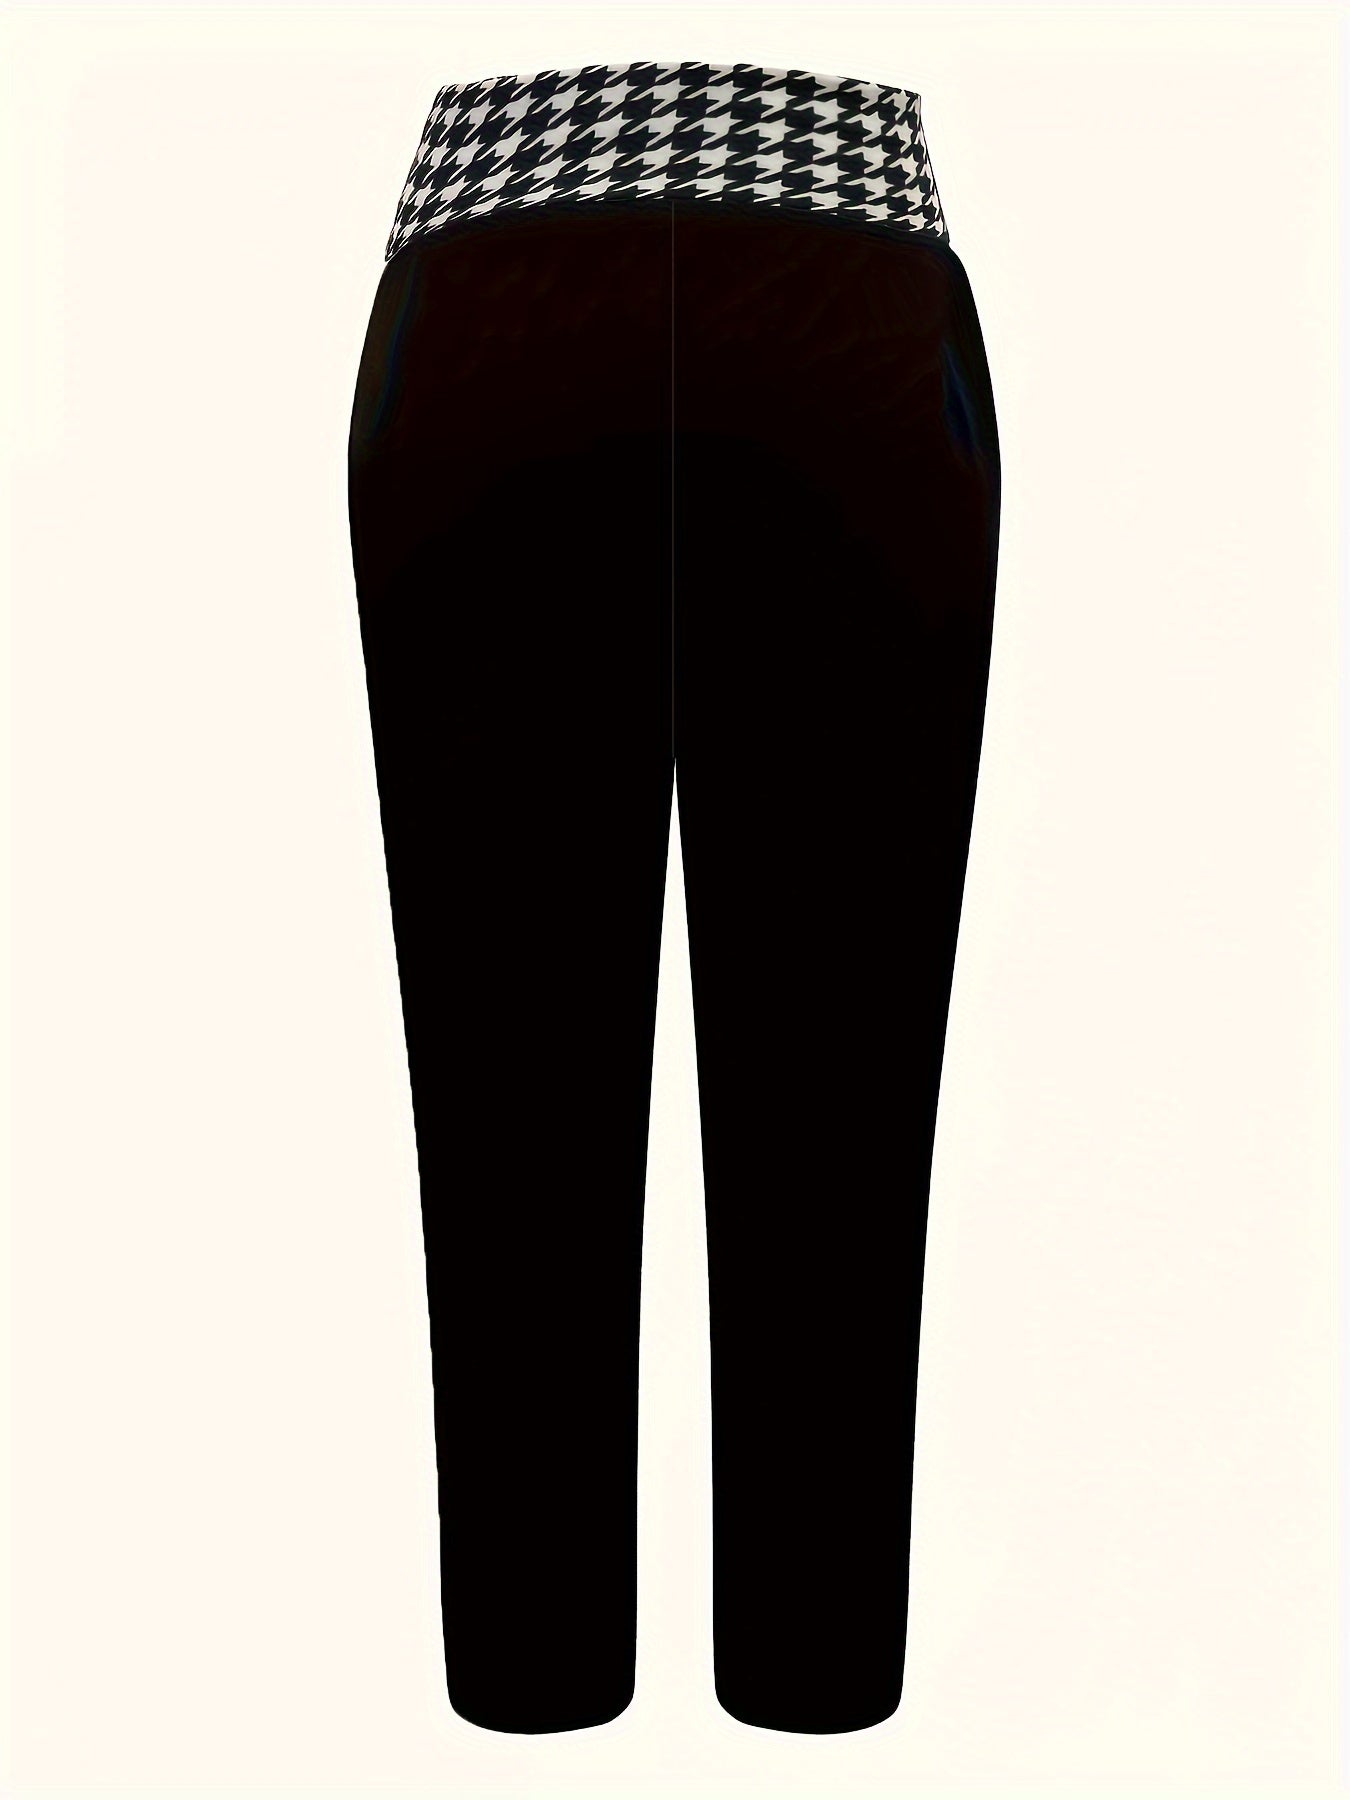 Button Female Pants Size: Your Essential Guide to Bottom Female Pants - CasualFlowshop